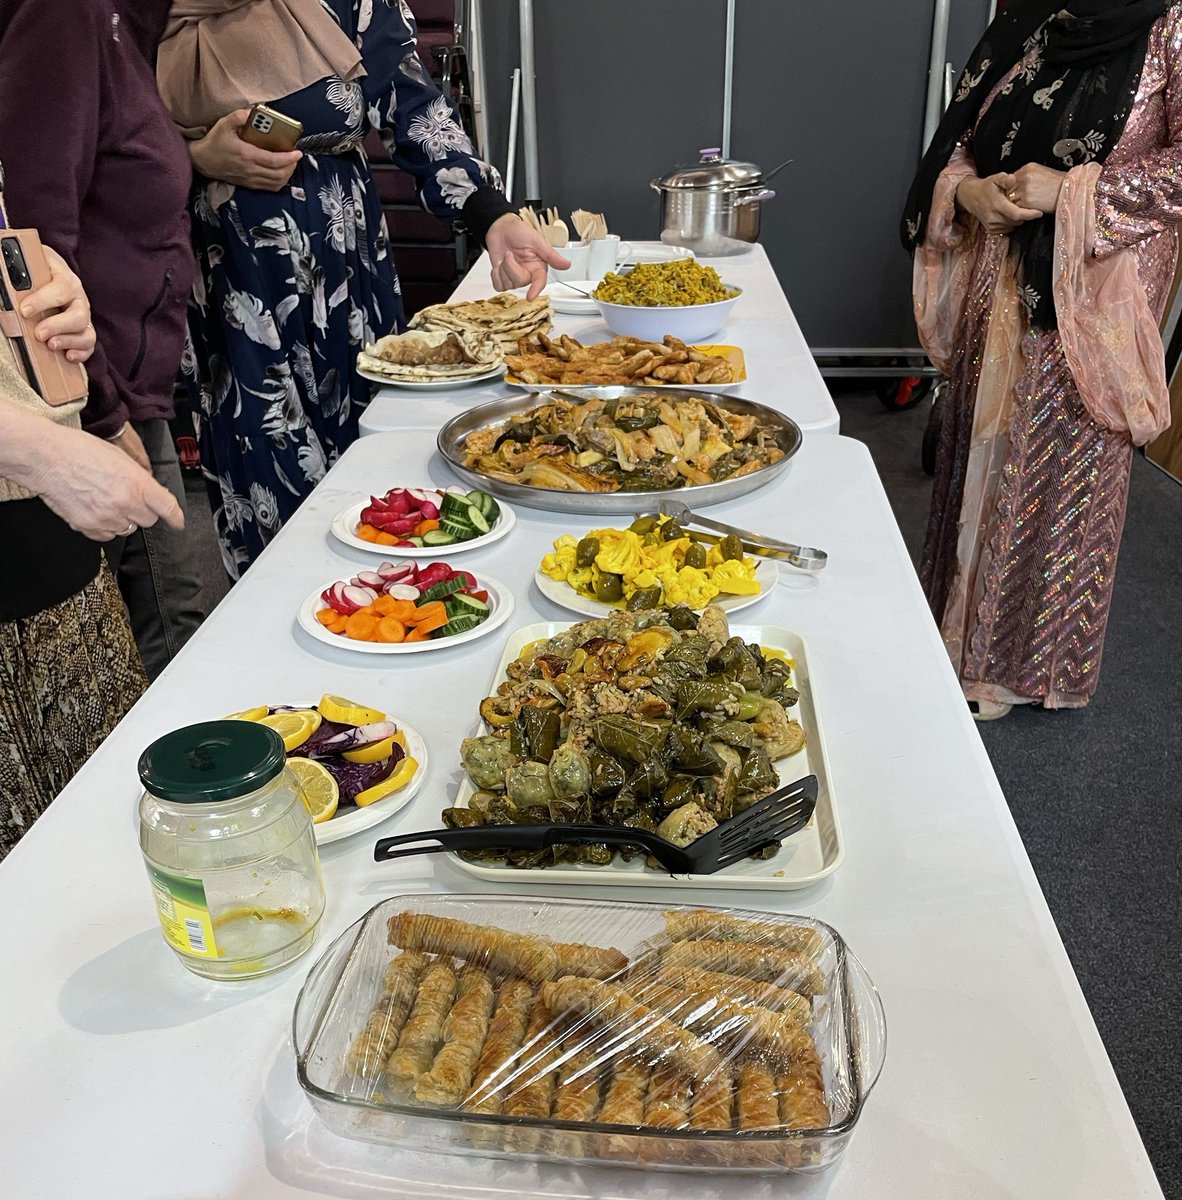 What food are you enjoying this Sunday afternoon? 🍽 Last week at Upbeat Women, we tucked into a Kurdish feast 😍 It was a great way to create community by learning about each other's cultures. If you have a recipe from your culture to share, send a reply to let us know!